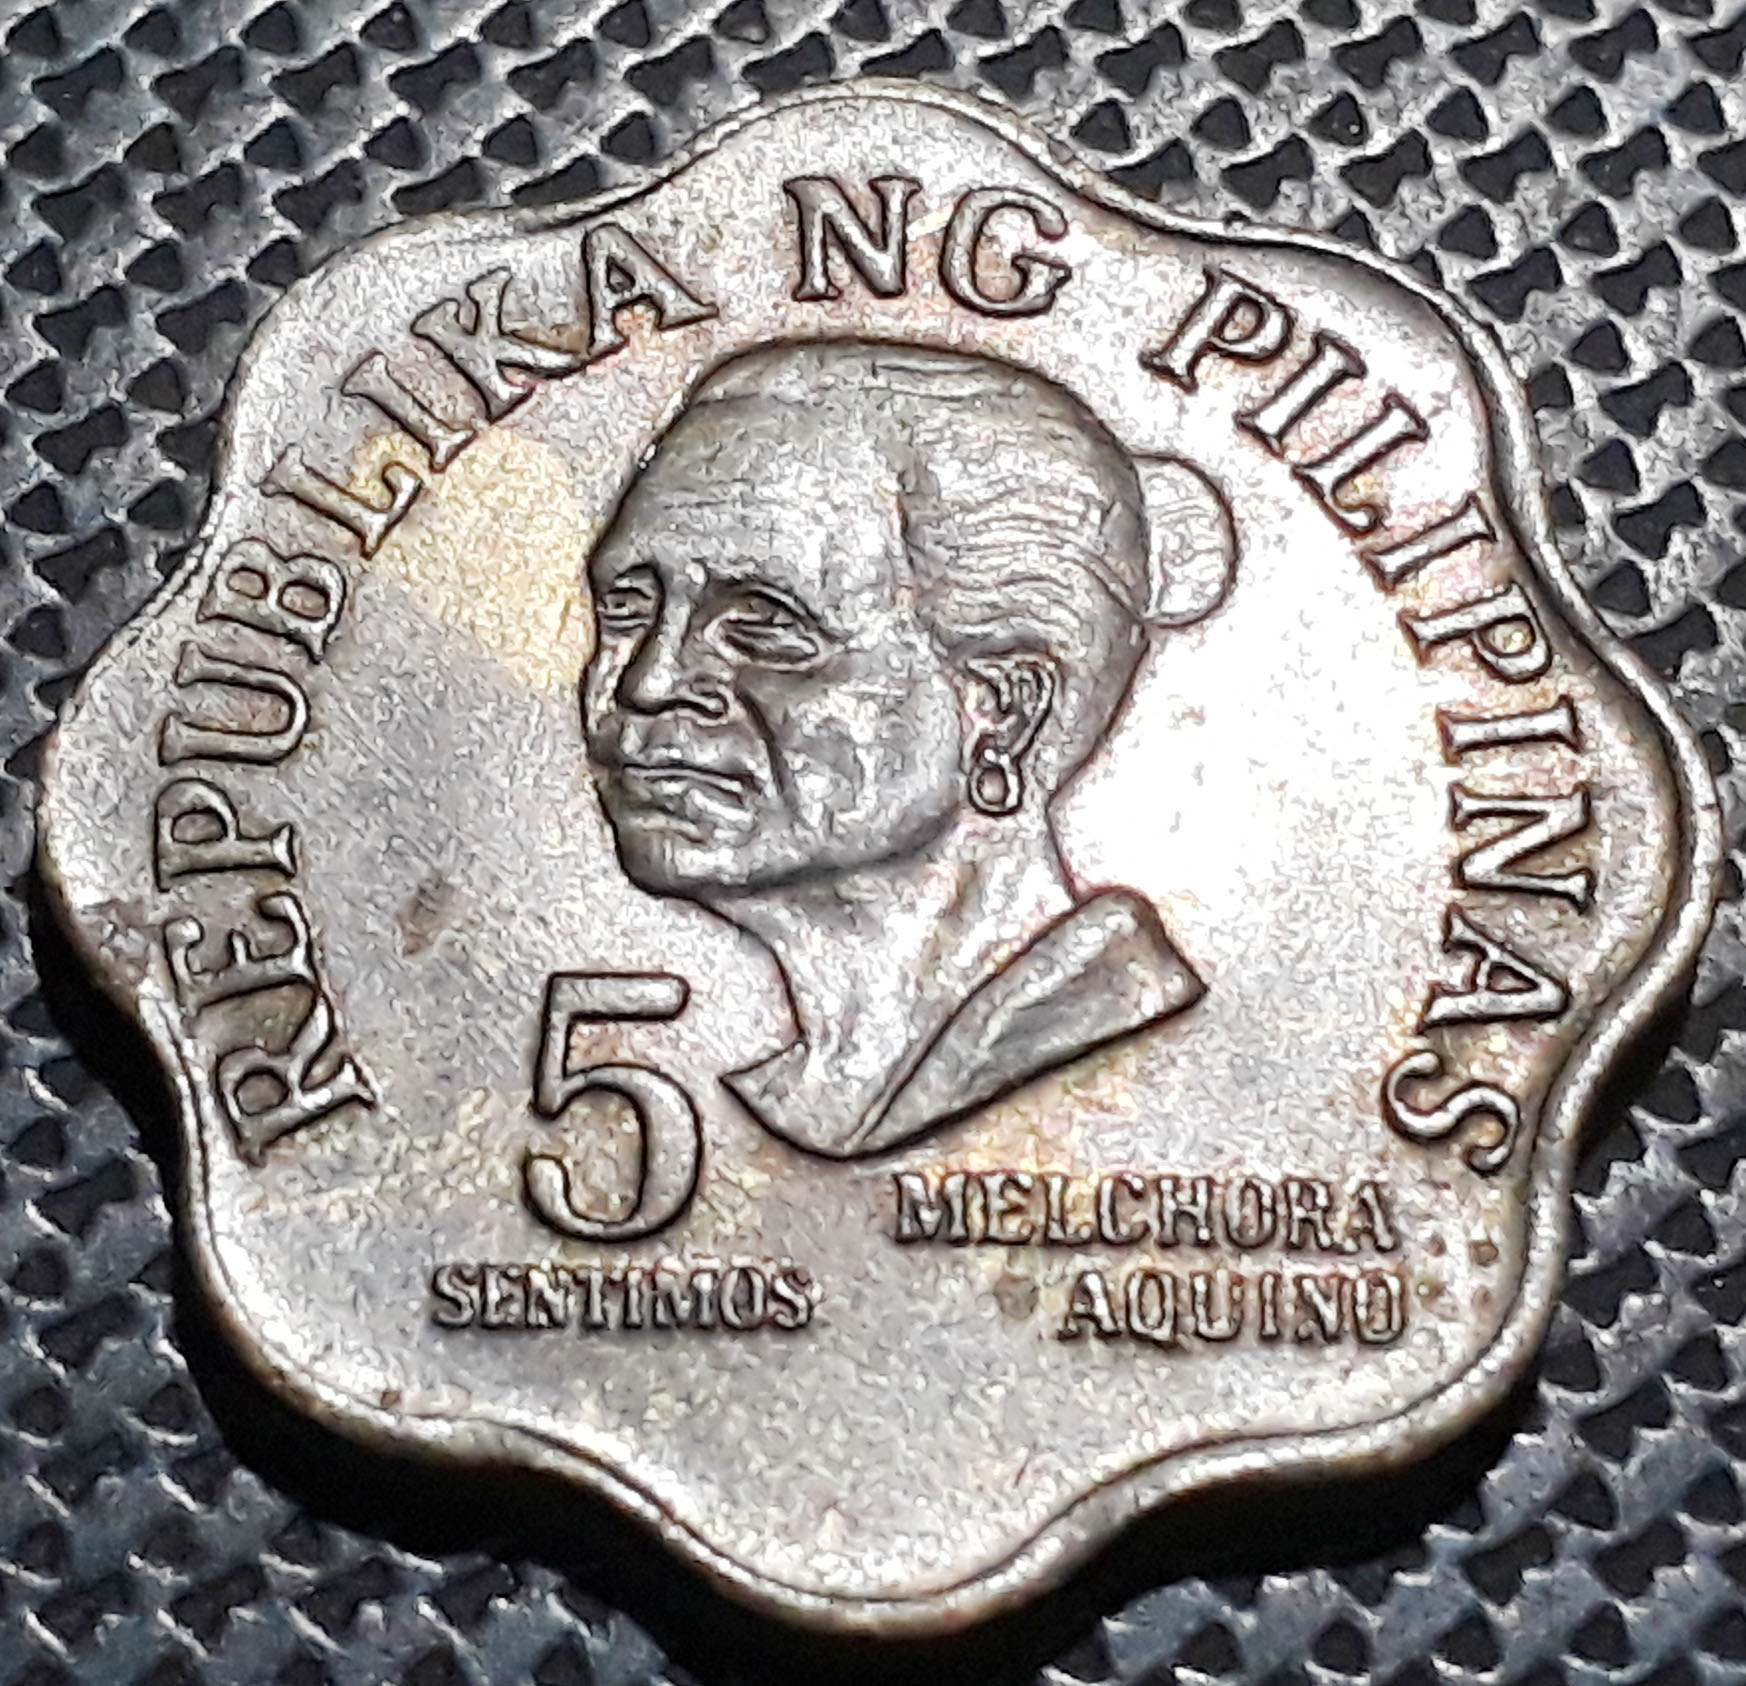 PHILIPPINES 5 SENTIMOS COIN 1976 - Melchora Aquino, known as the "Mother of the Philippine Revolution"